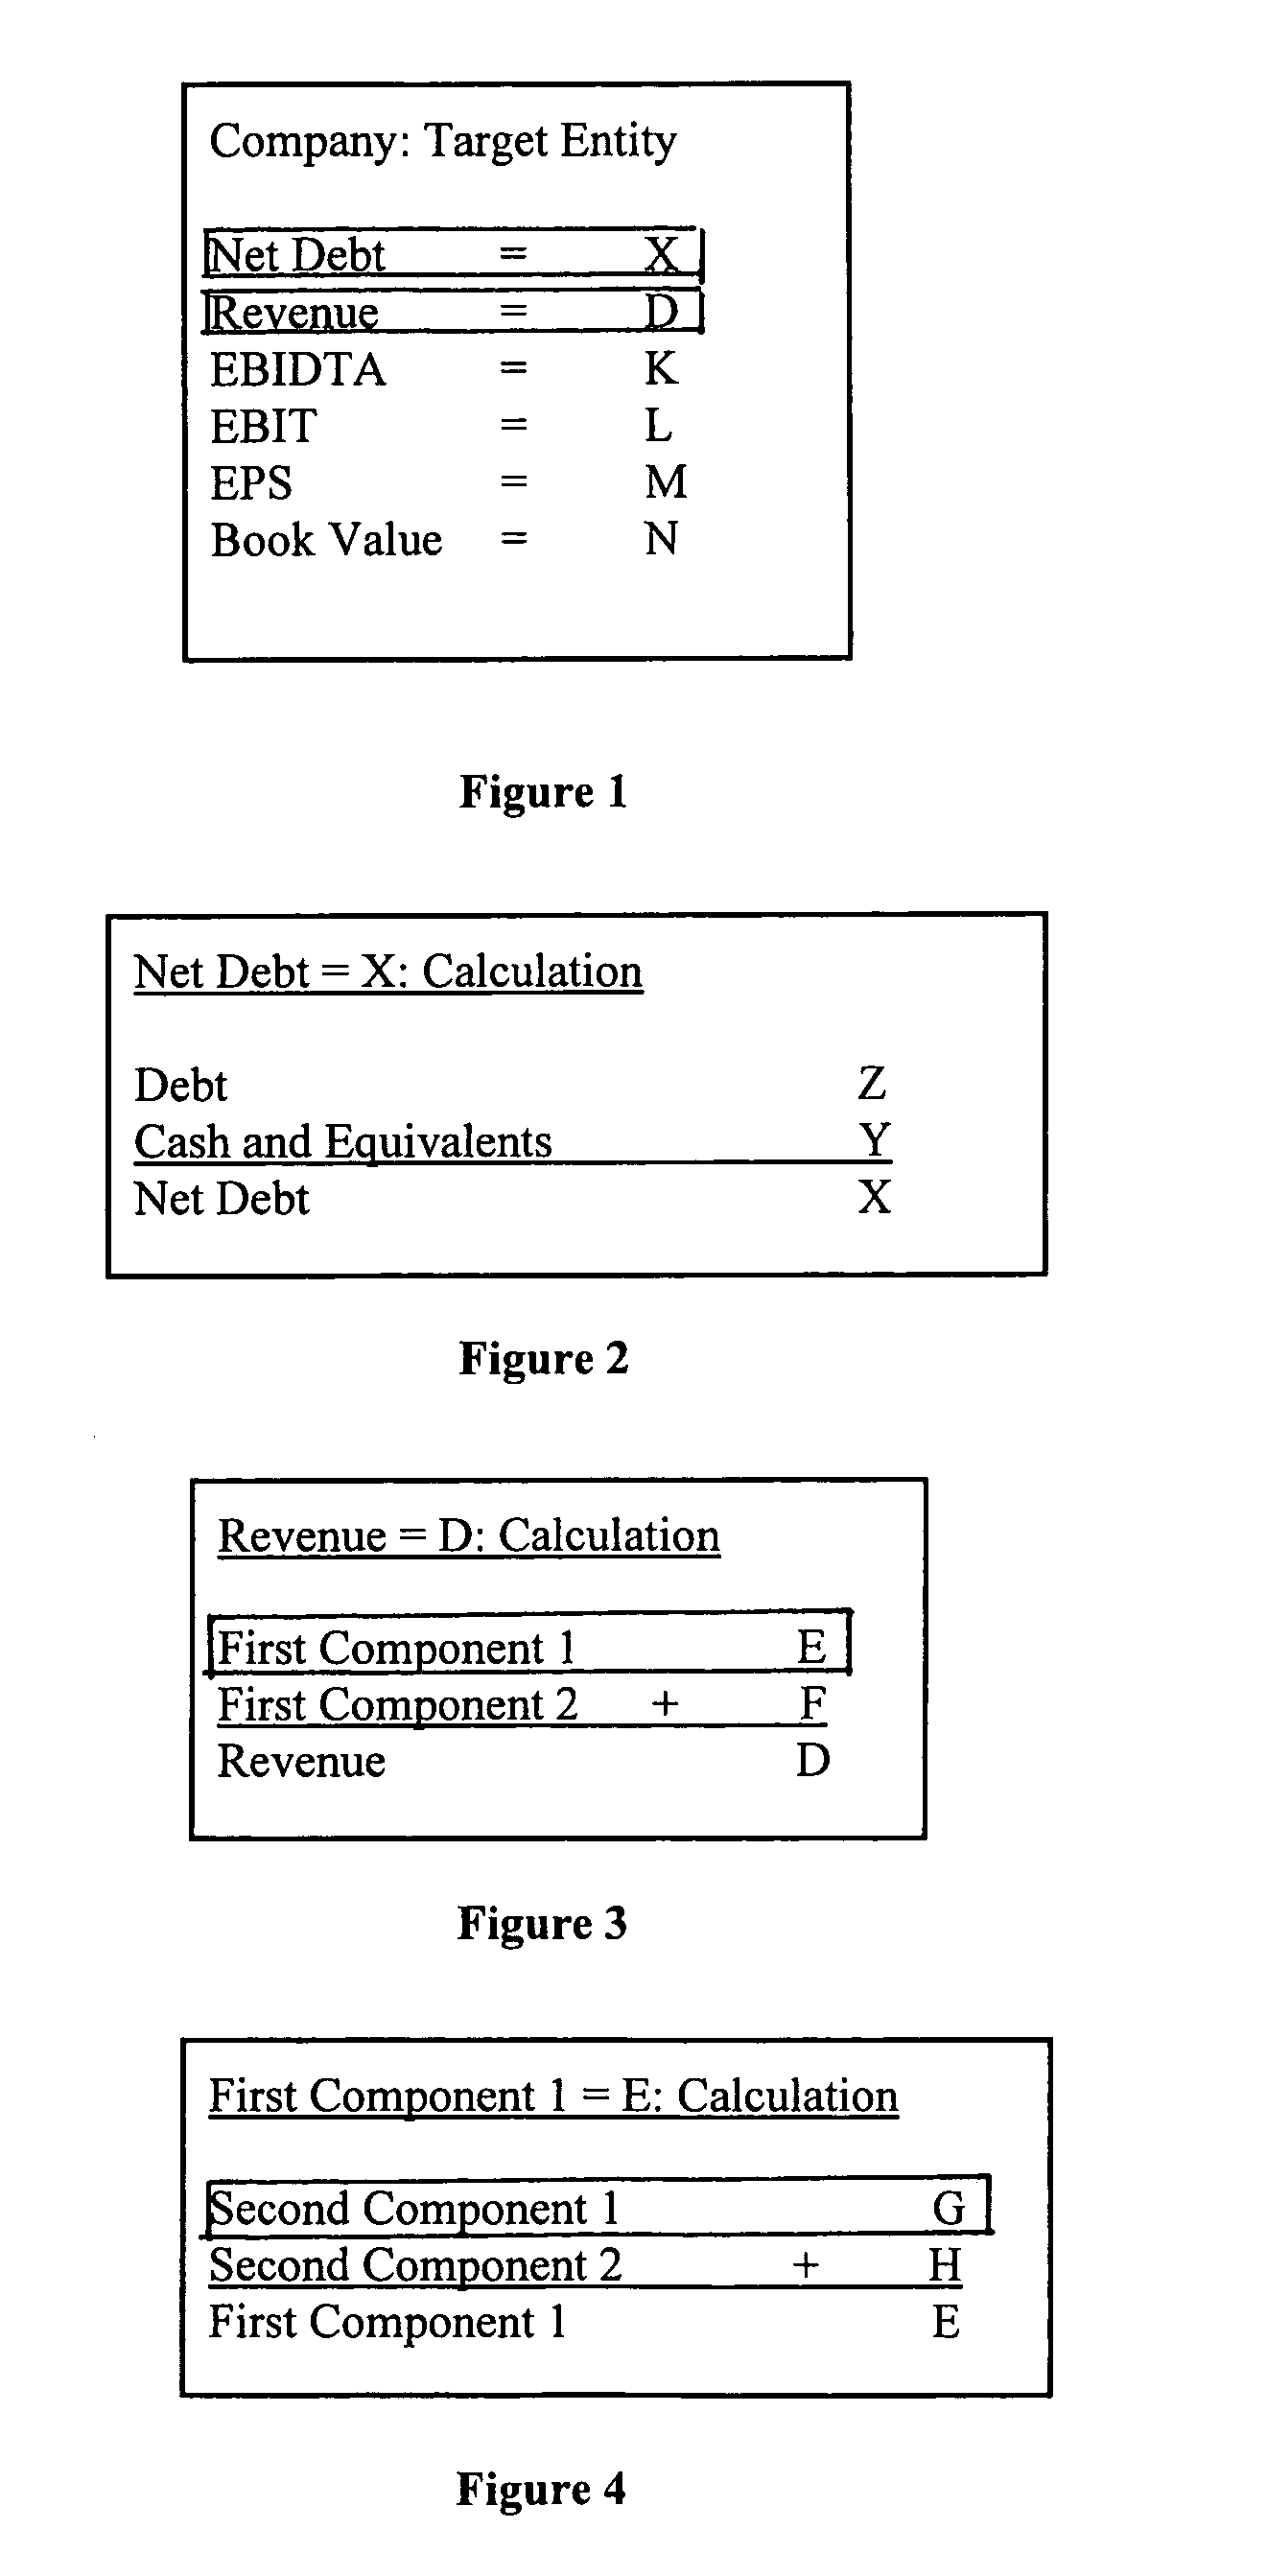 System and method for locating a document containing a selected number and displaying the number as it appears in the document